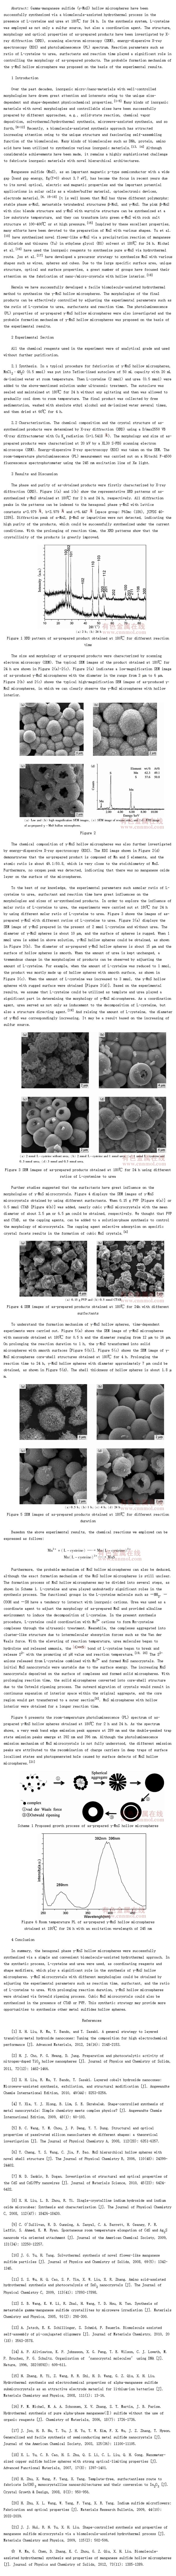 Biomolecule-Assisted Hydrothermal Synthesis and Properties of Manganese Sulfide Hollow Microspheres